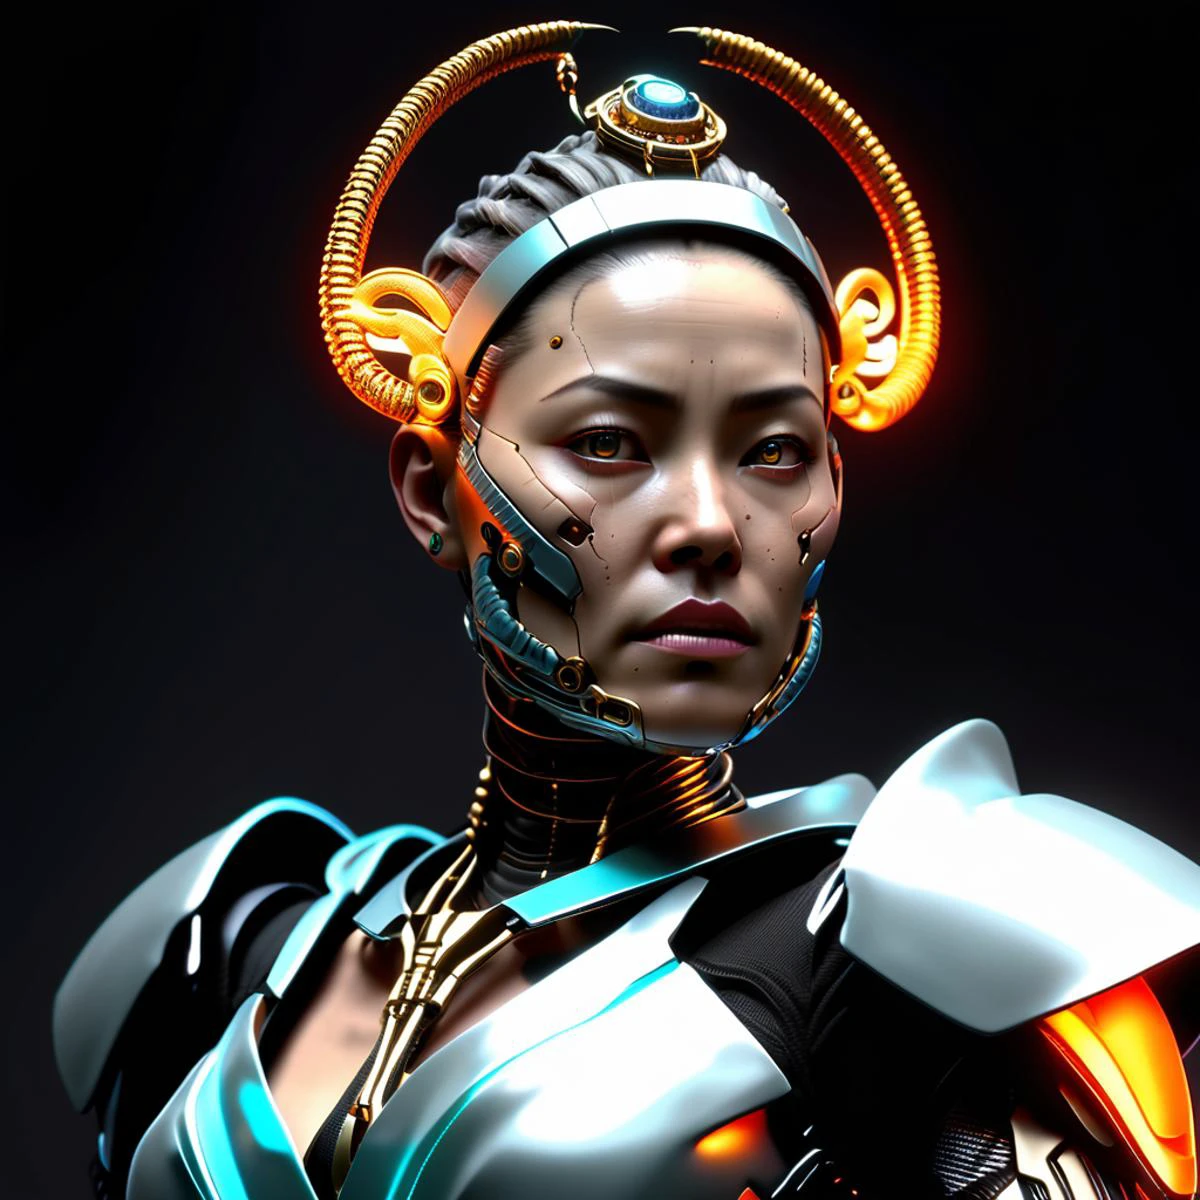 ((best quality)), ((masterpiece)), ((realistic,digital art)), (hyper detailed),female Underground Surgeon, Cybernetic Mercenaries, Human mercenaries with cybernetic implants and body augmentations, Middle-aged, Stacked, Southeast Asian, Amber eyes,   Pointed Chin, Overbite Jaw, Round Cheeks, Receding Forehead,  Well-formed Back Muscles, Jaw, Grey Crown braid hair, Worry, Pensive Posture, Character stands with one hand on the chin, lost in thought or contemplation., Holographic Hologram Wings wearing  Holographic Kimono Skirt,  Cyber-Satin Wrap, , , ,Bioluminescent Veil ,, Ready for Action, Character crouches with legs bent, ready to spring into action. ,scifi, realistic, nose, cyborg,  octane rendering, raytracing, volumetric lighting, Backlit,Rim Lighting, 8K, HDR, 